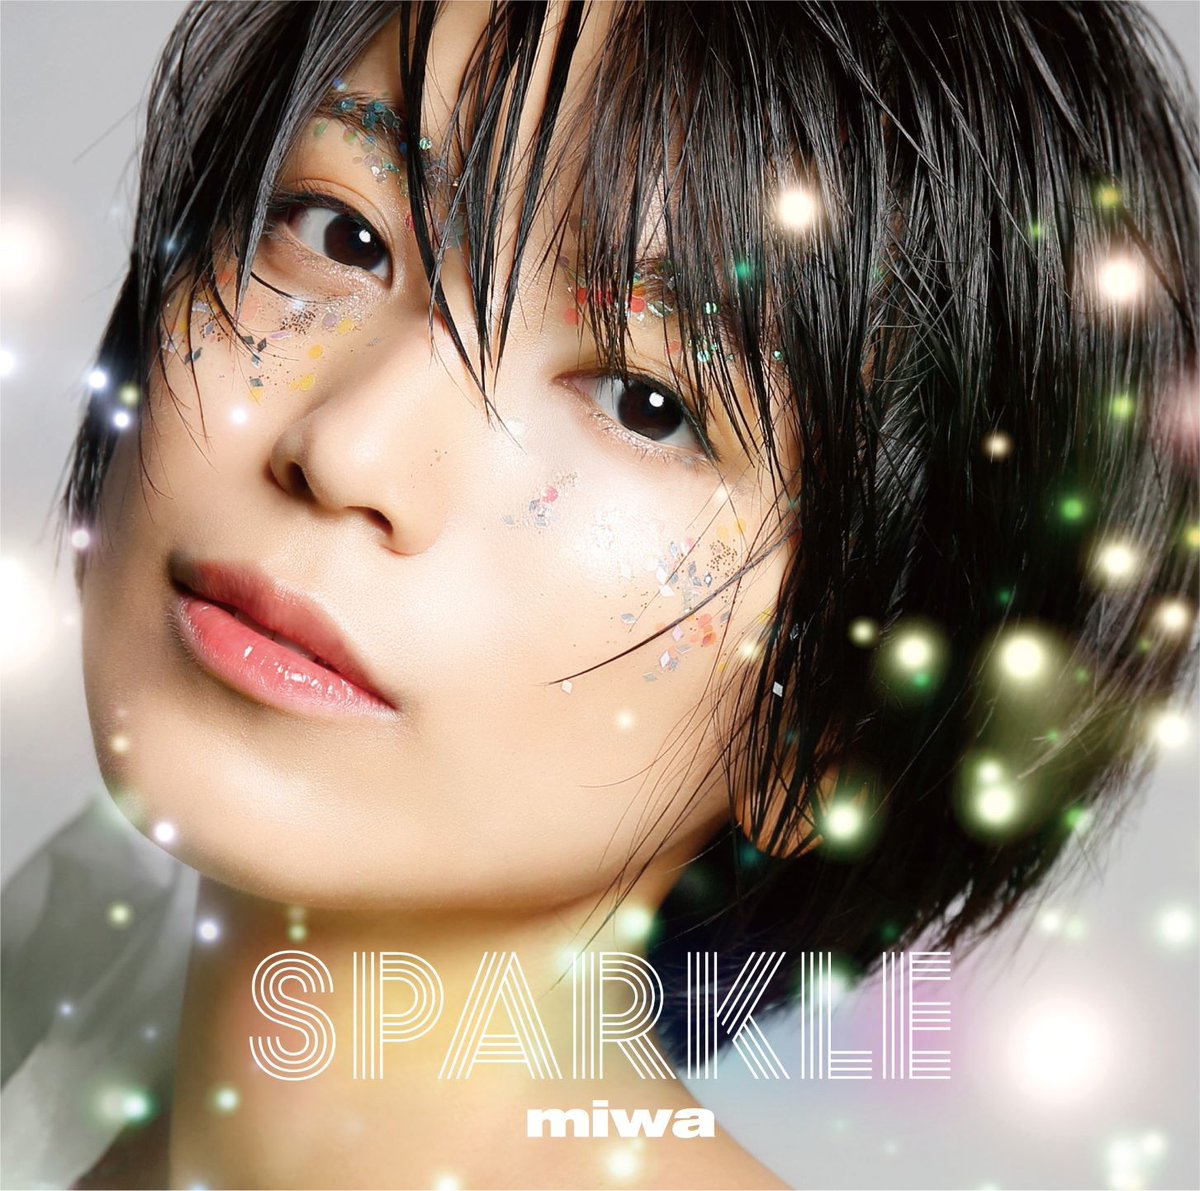 Cover for『miwa - UUU』from the release『Sparkle』